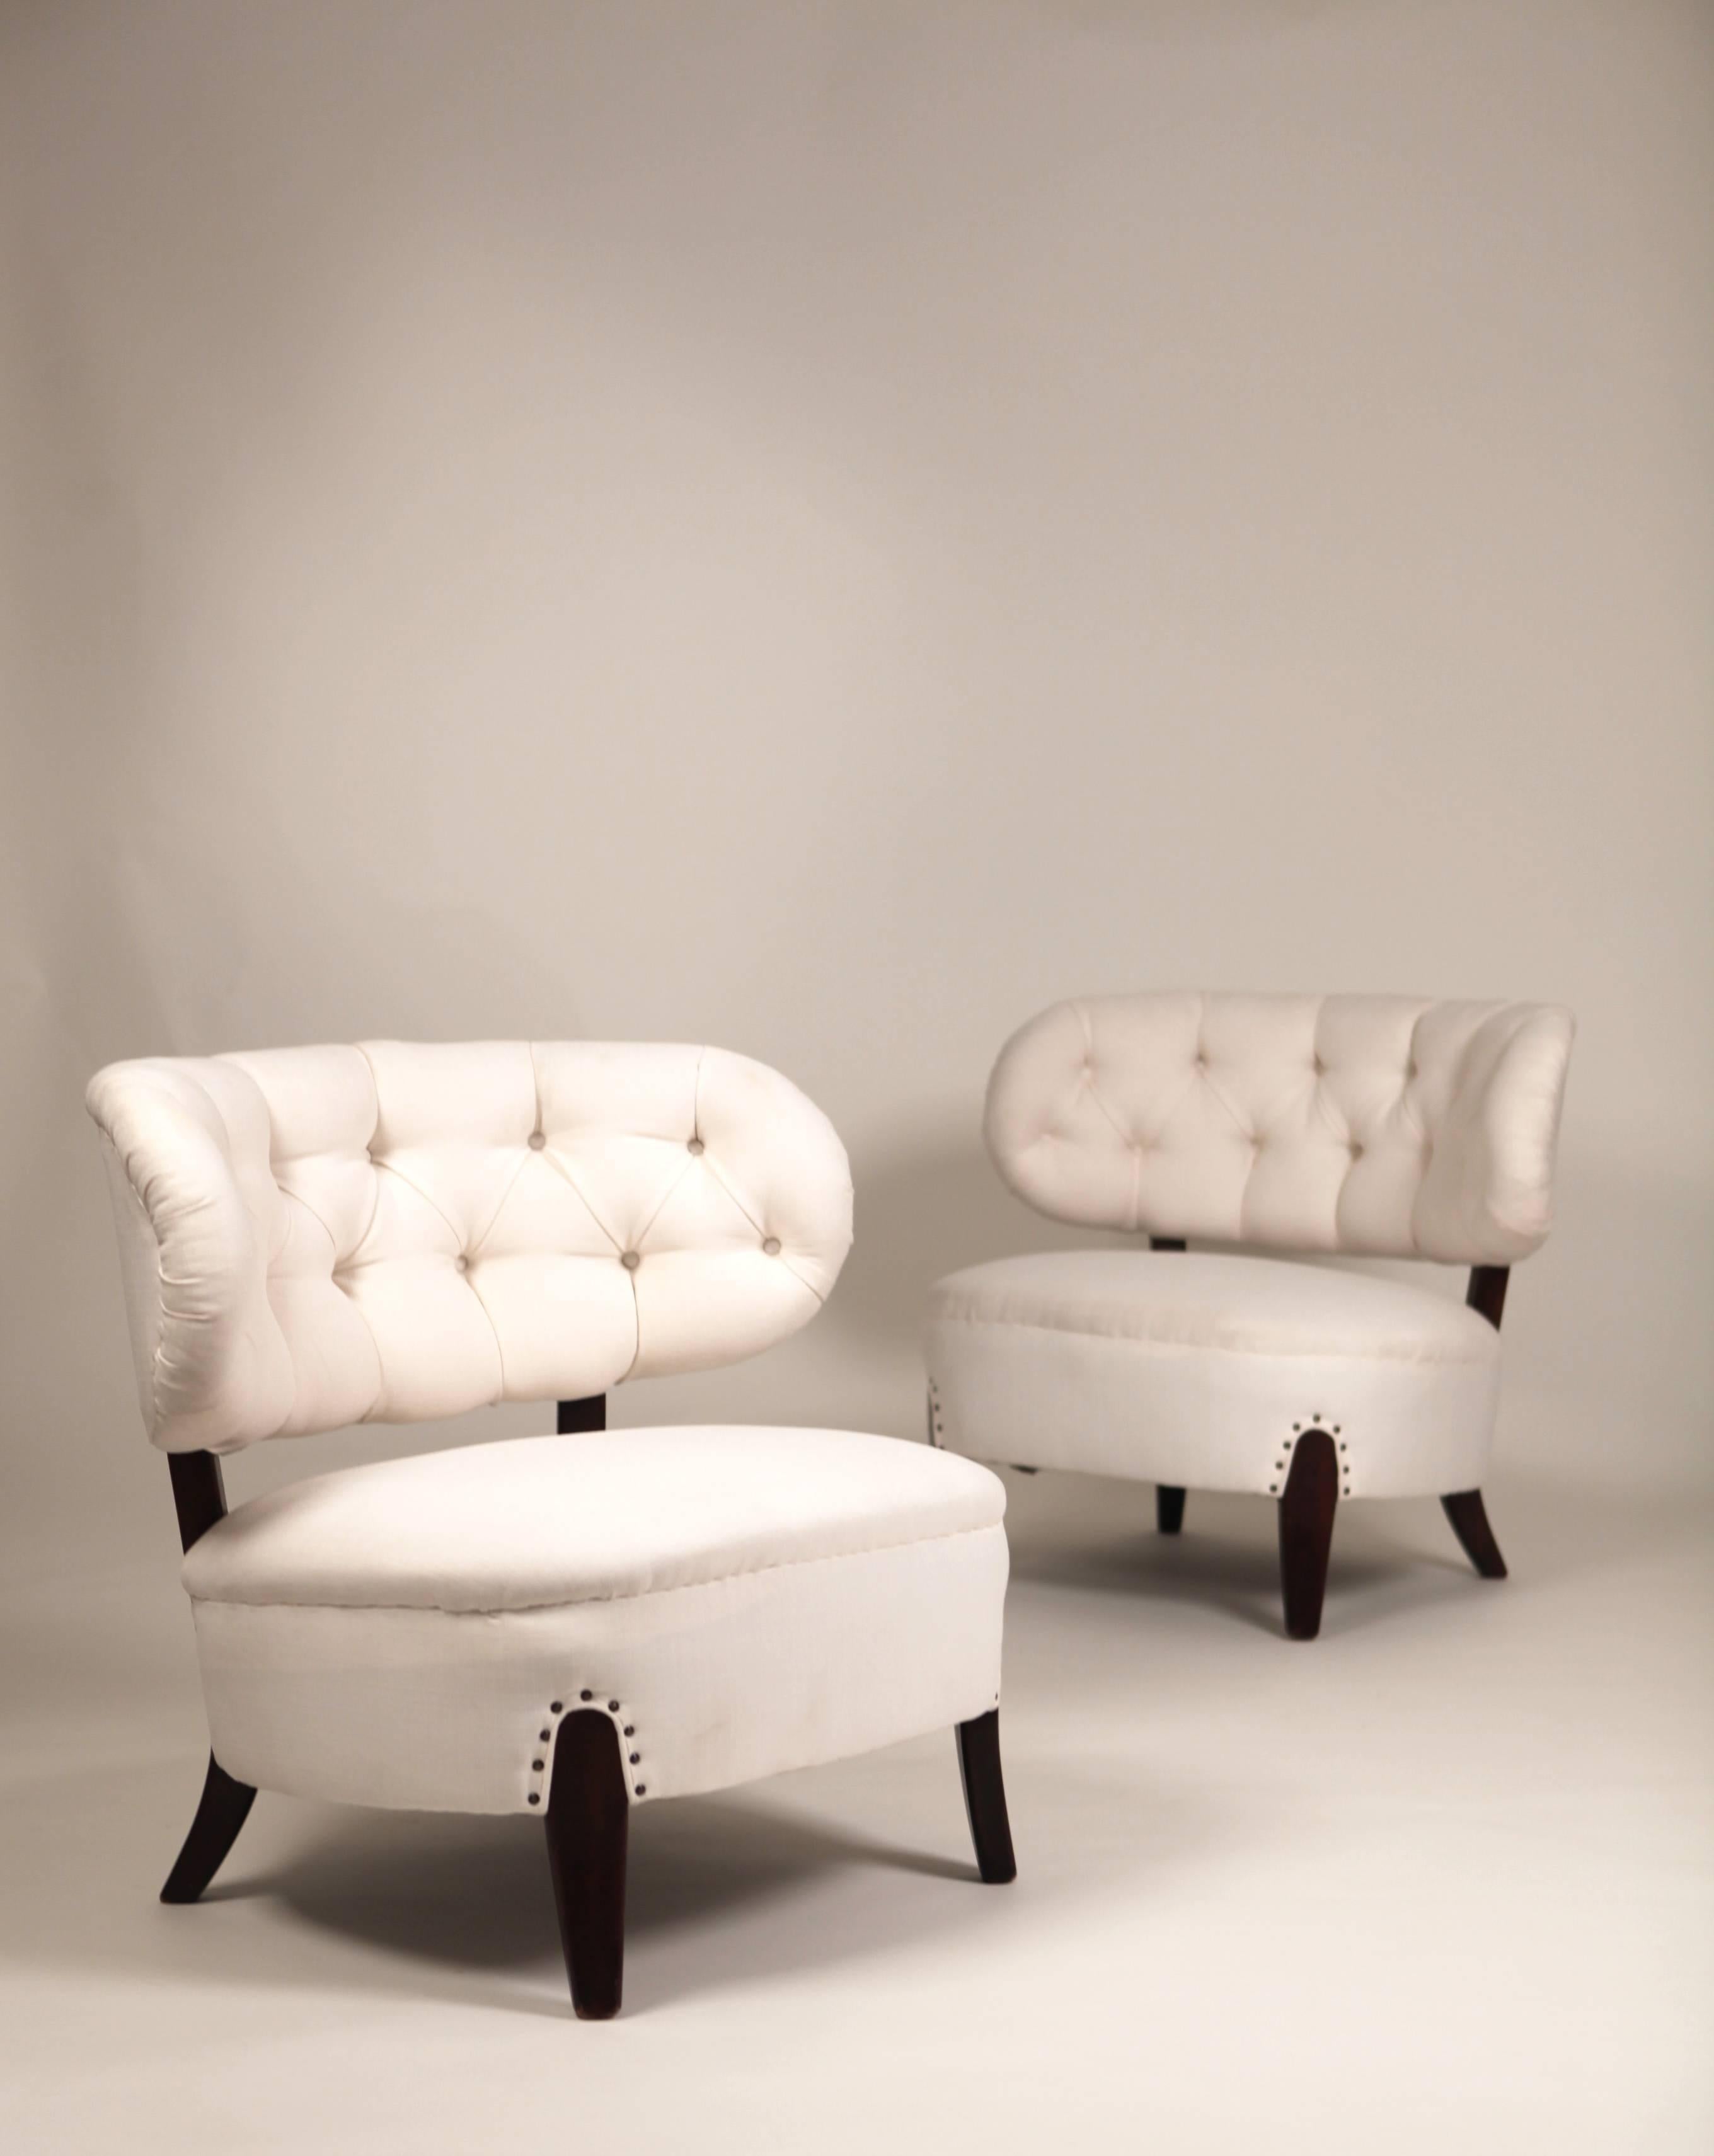 A pair of Schulz cocktail chairs manufactured by Jio Möbler,
Sweden, 1940s.